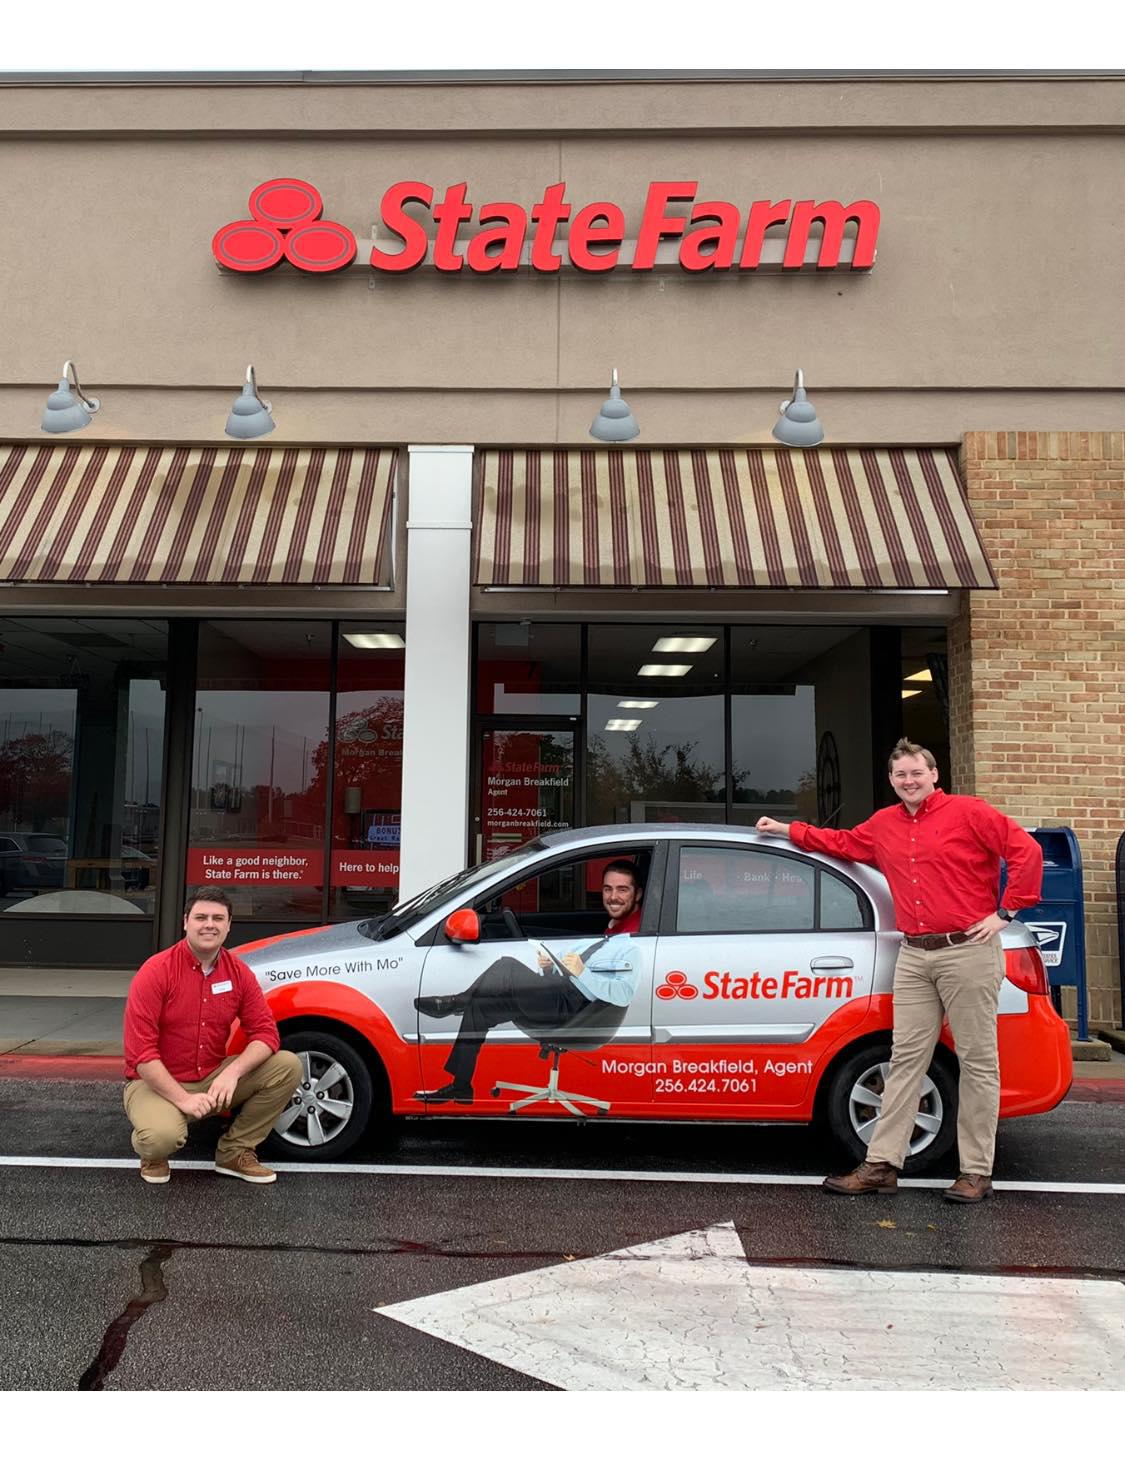 Our State Farm Agency